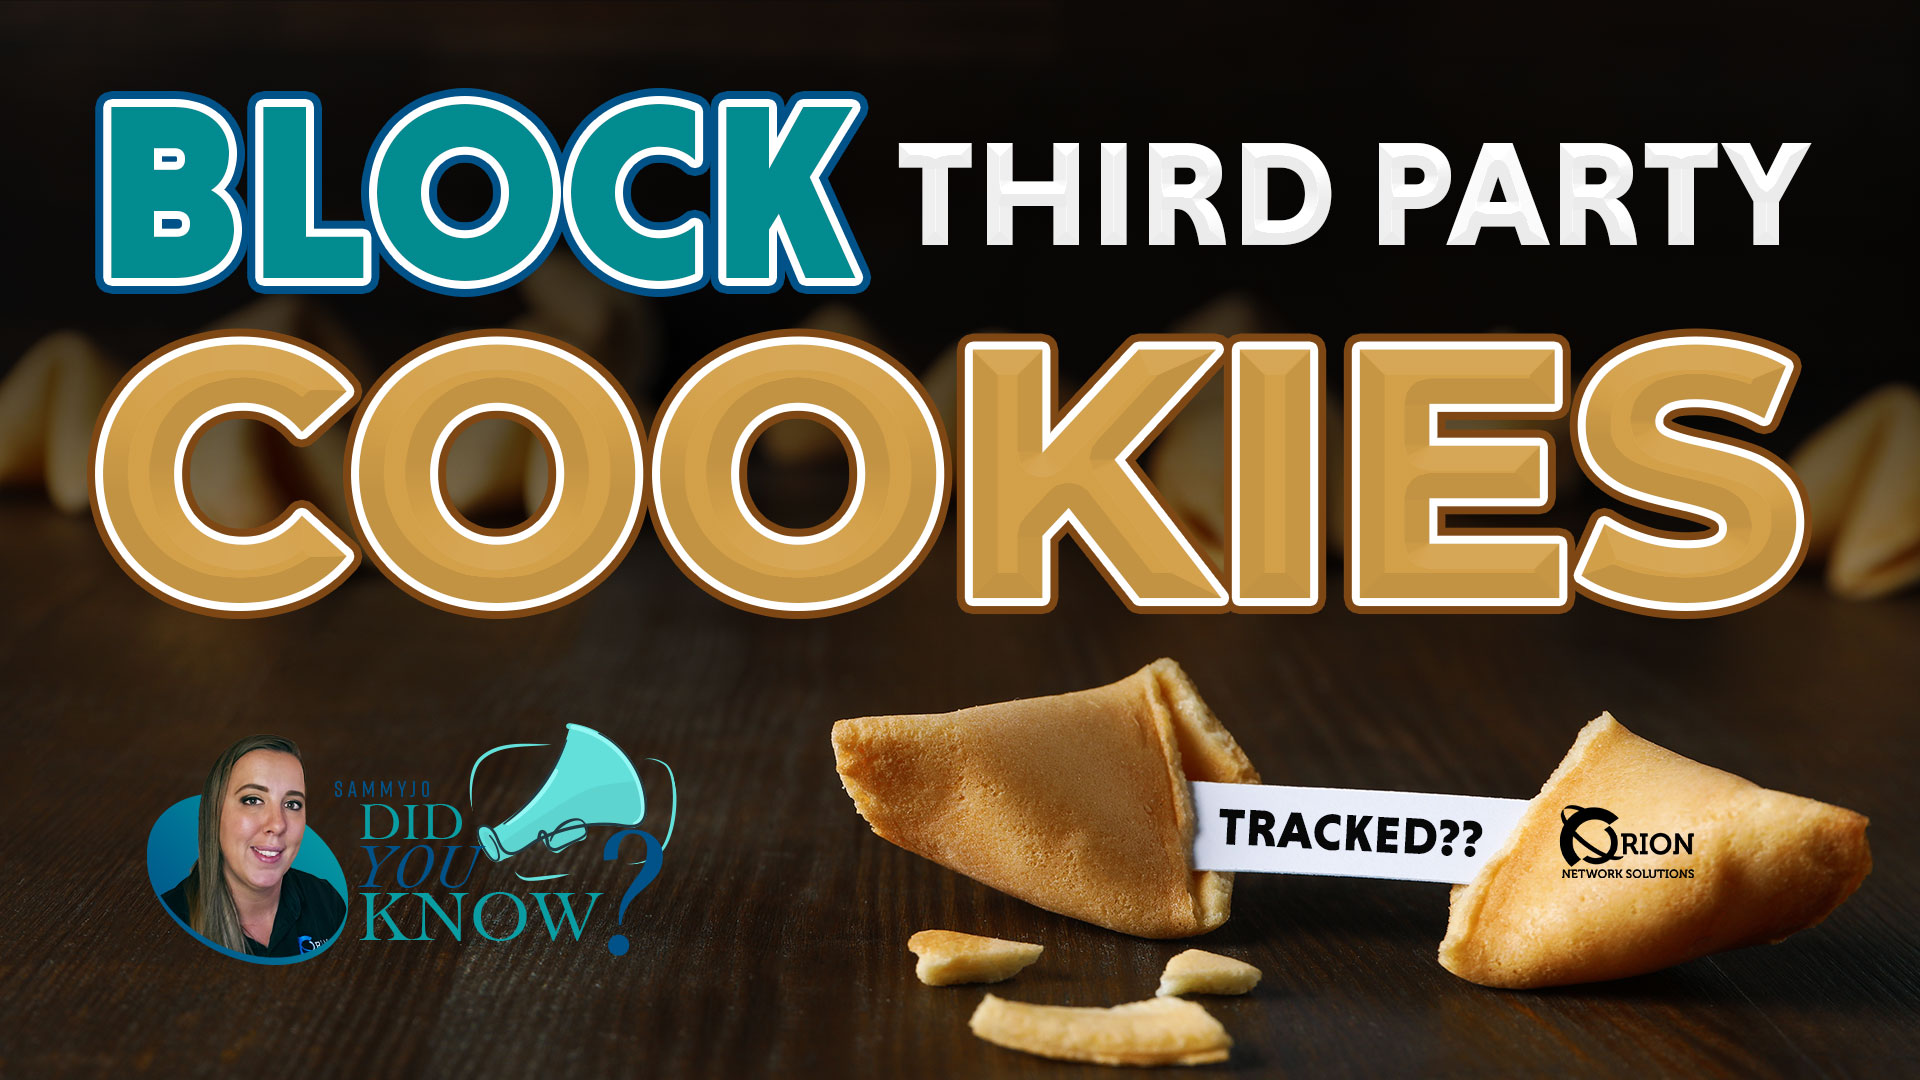 How To Delete & Block Third Party Cookies?